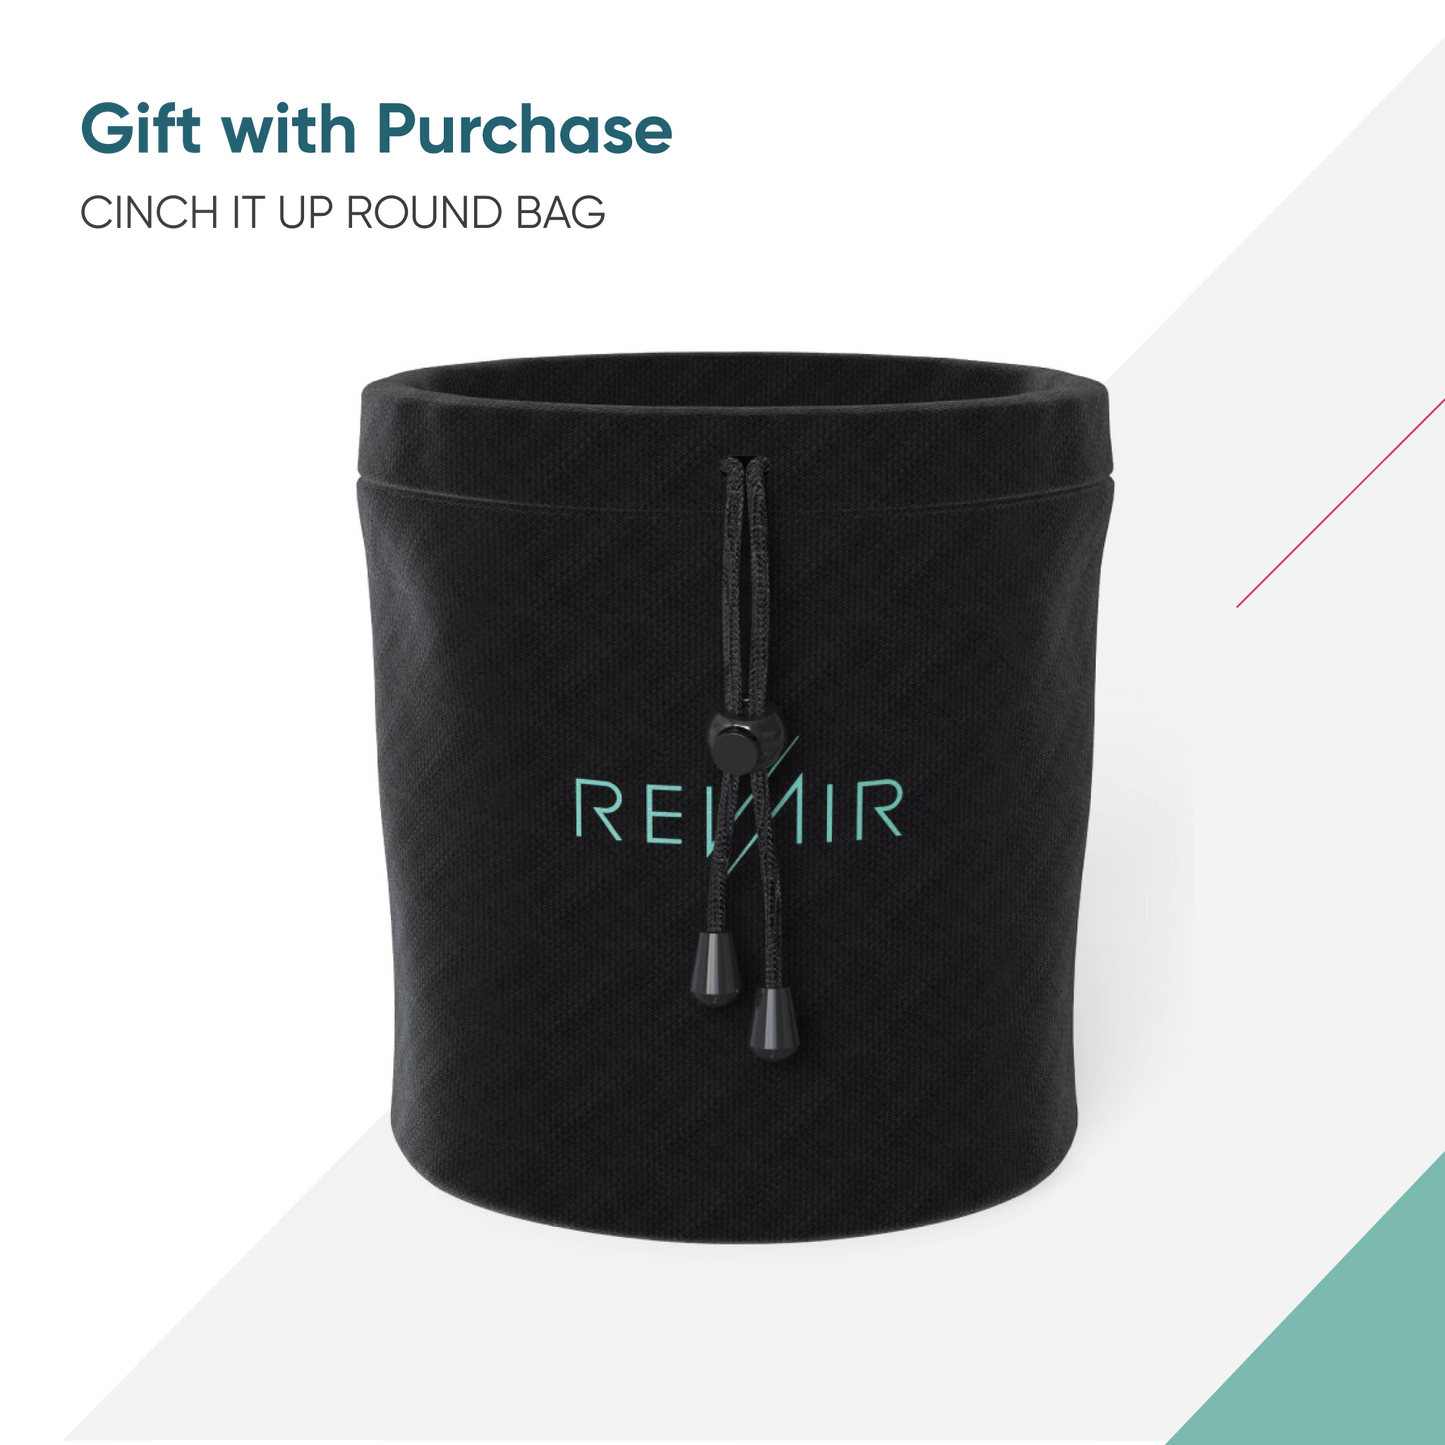 RevAir Wand Holder Gift with purchase Cinch it up round bag